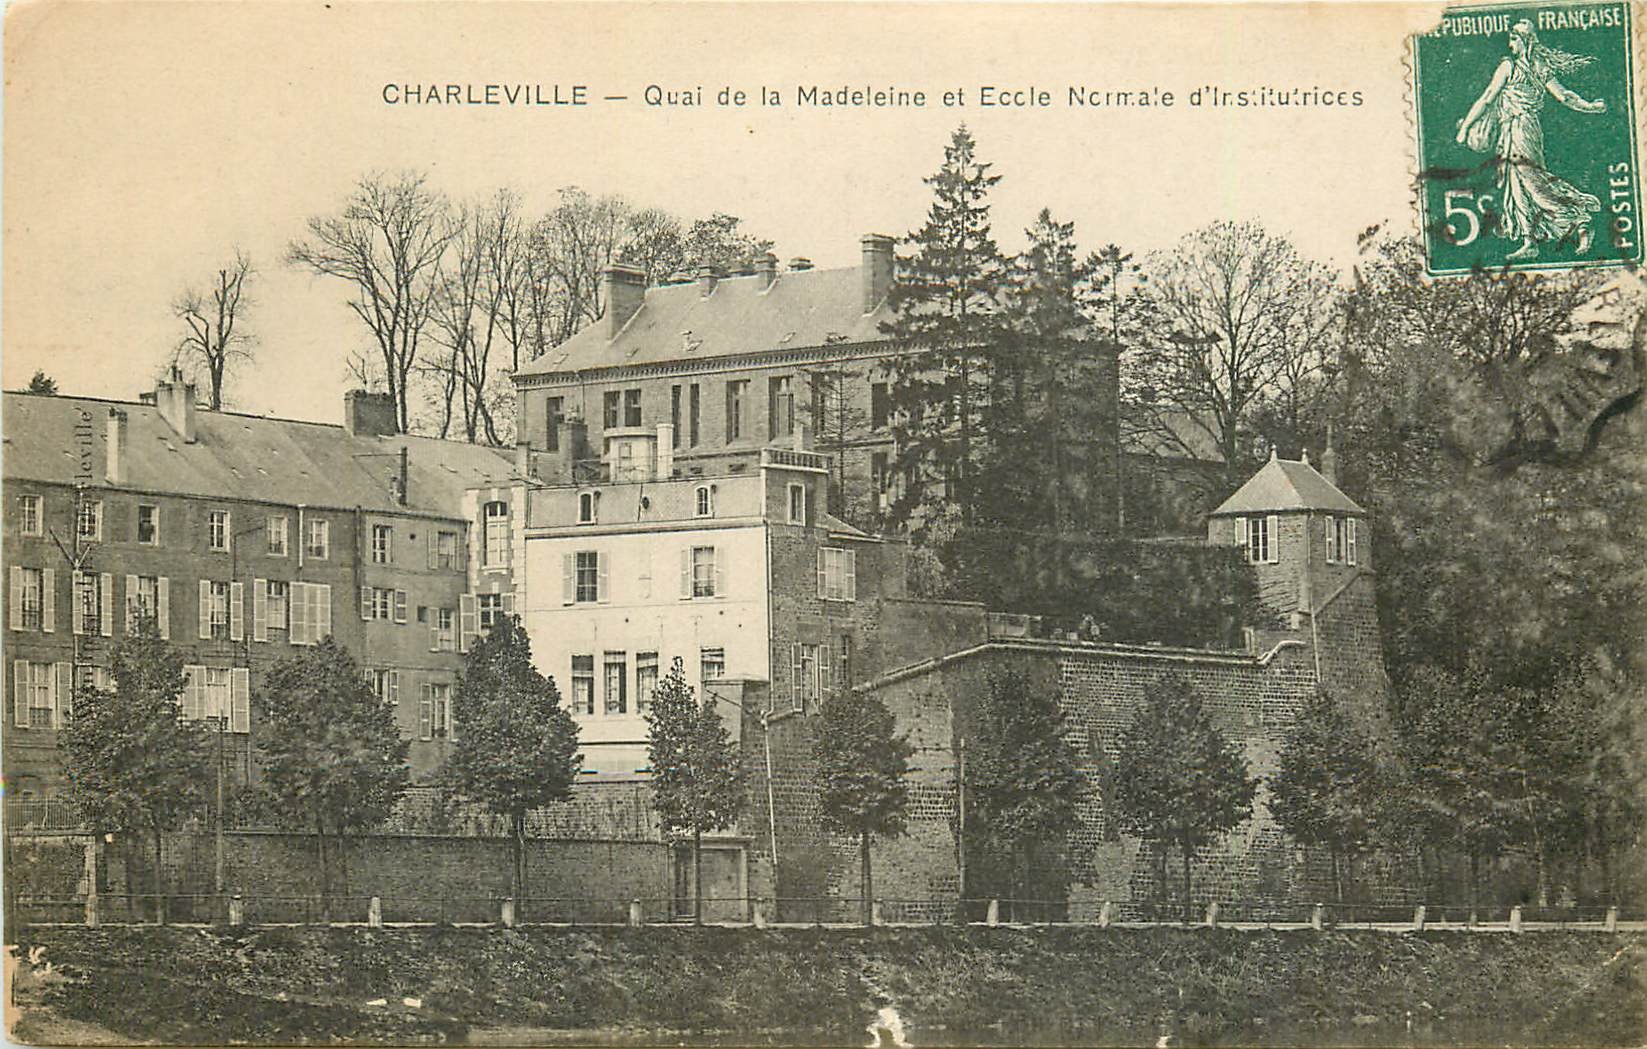 08 CHARLEVILLE. Ecole Normale Institutrices Quai Madeleine 1909